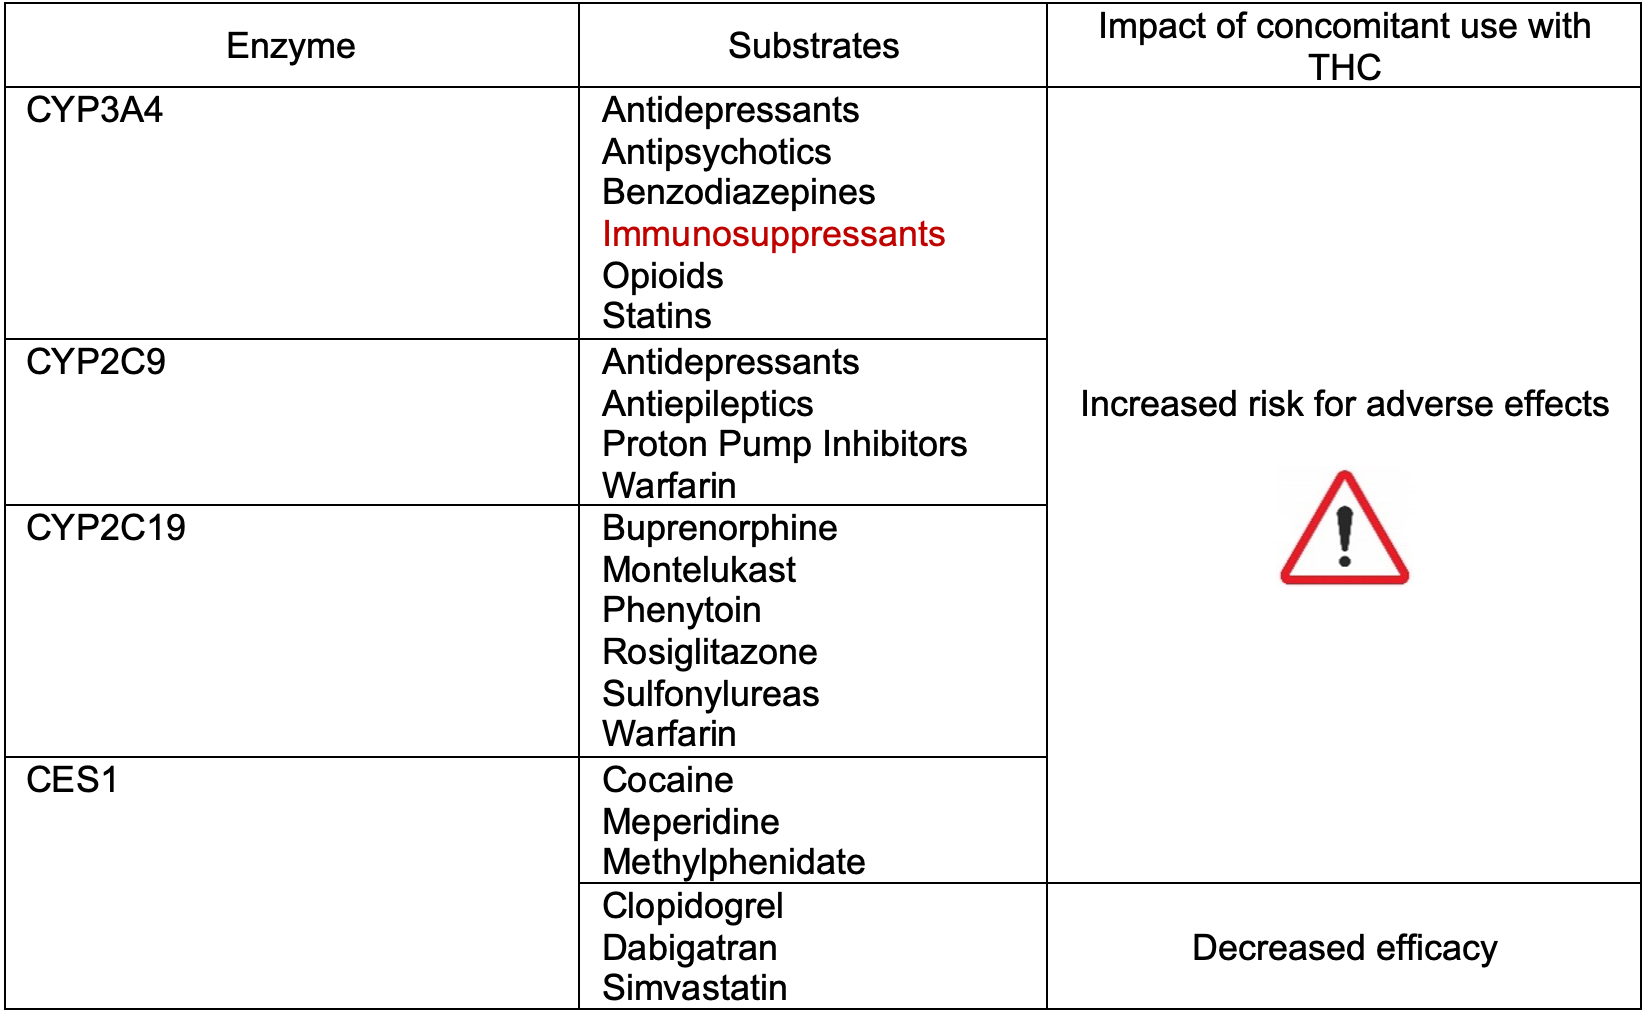 Summary of major drug interactions with THC